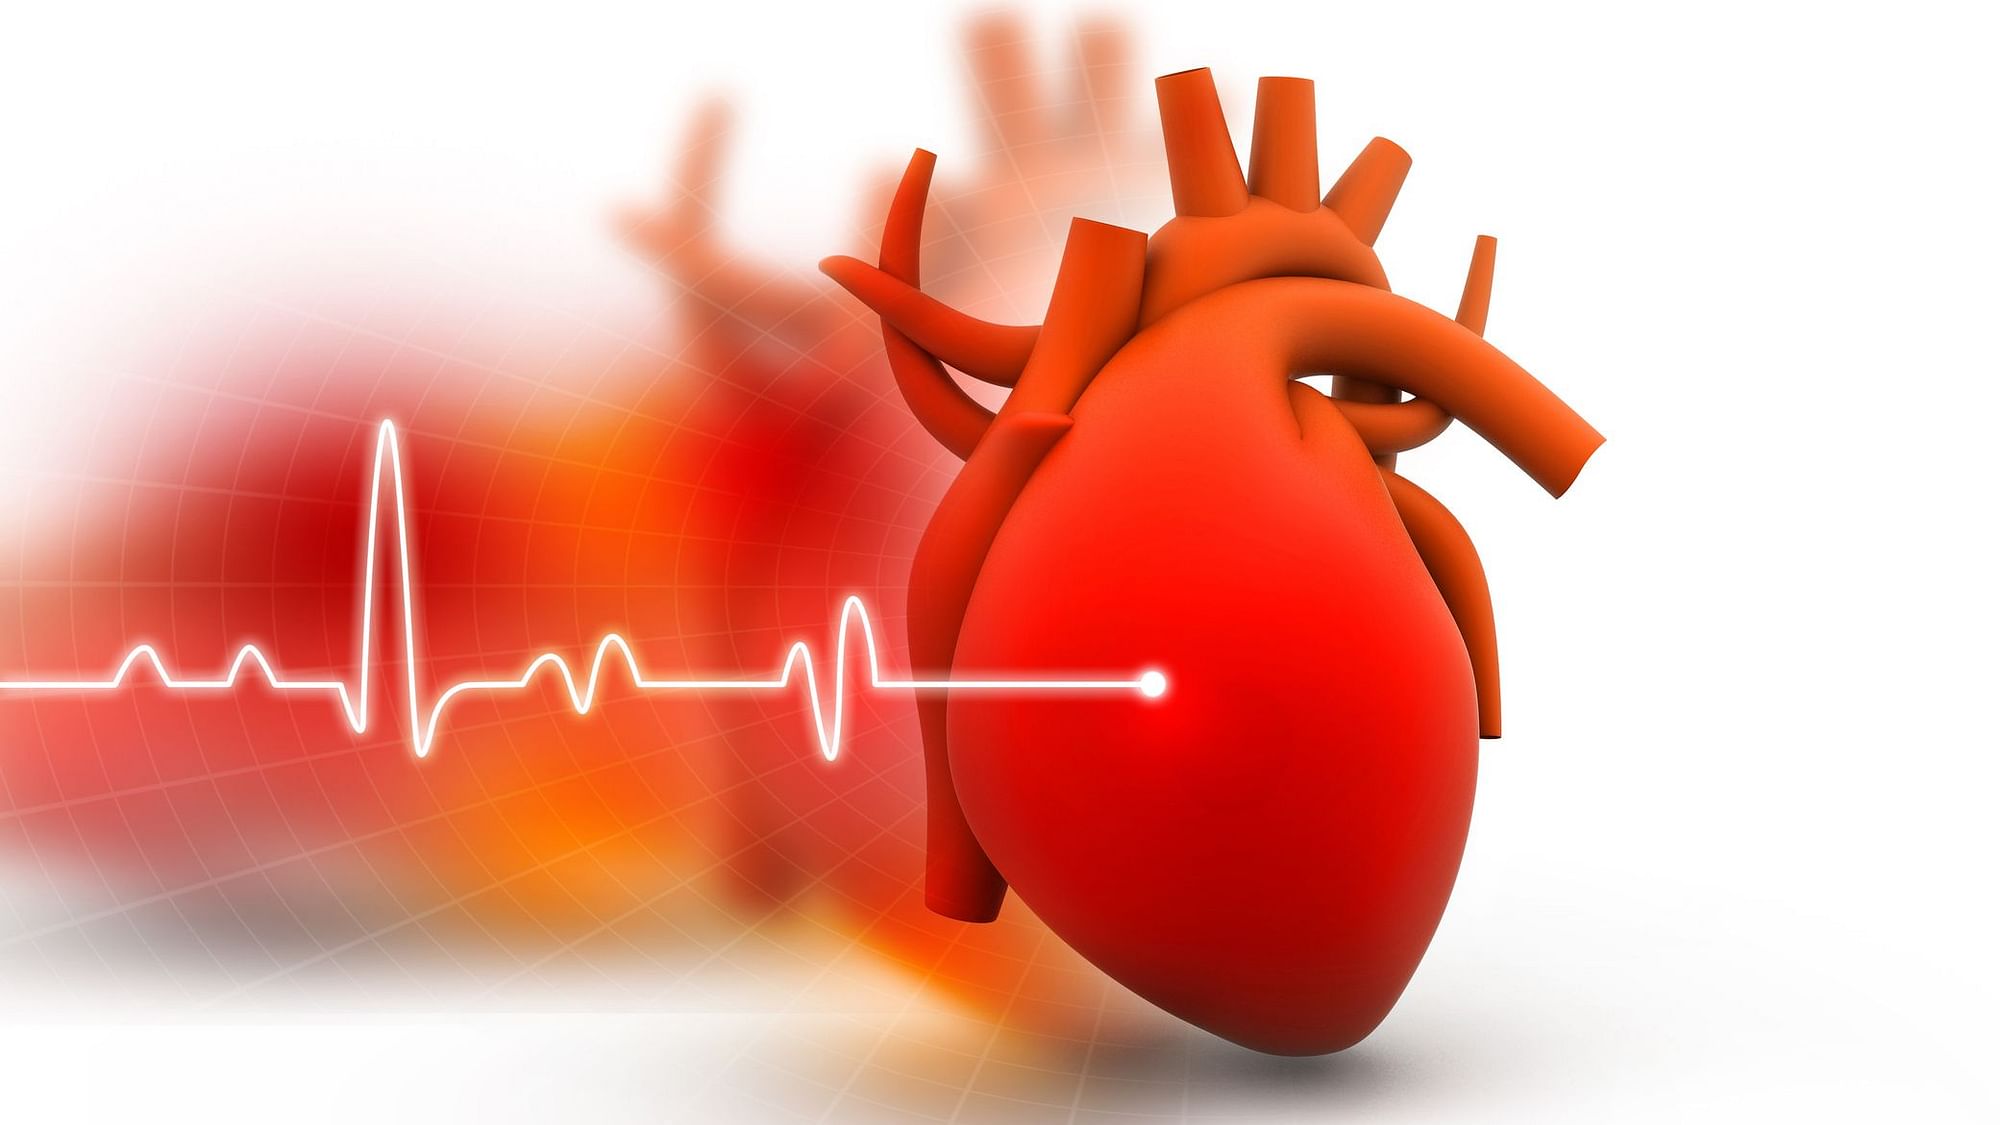 Now patients may get alerts about the risk of CVD in real time with the new device by IIT-H.